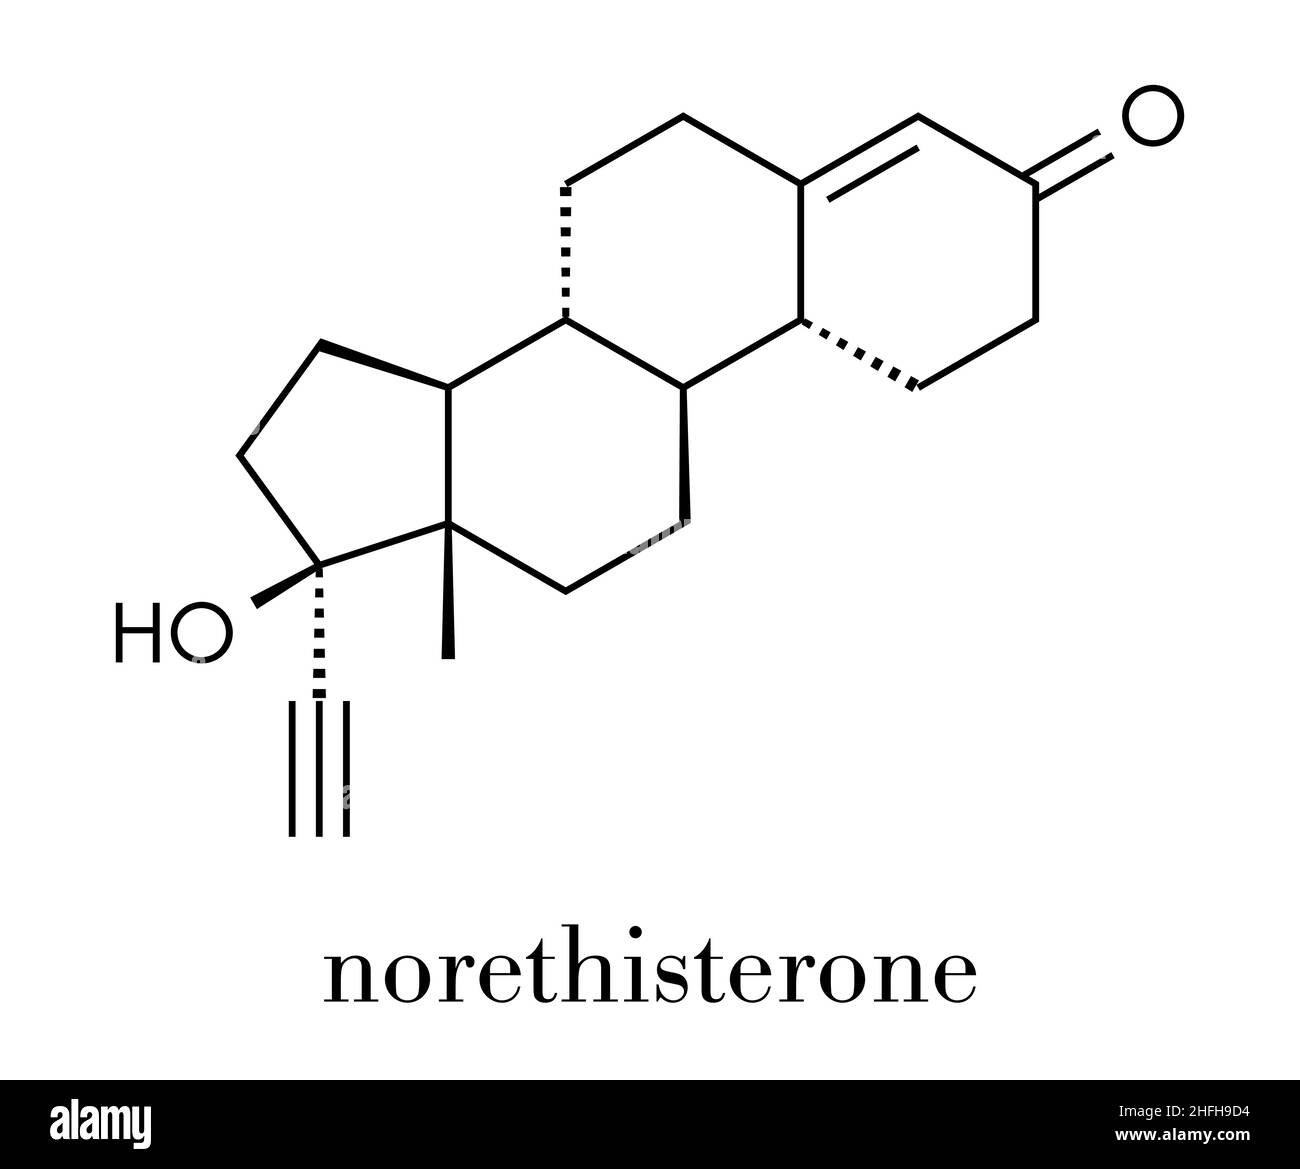 Norethisterone (norethindrone) progestogen hormone drug. Used in contraceptive pills and for a number of other indications. Skeletal formula. Stock Vector